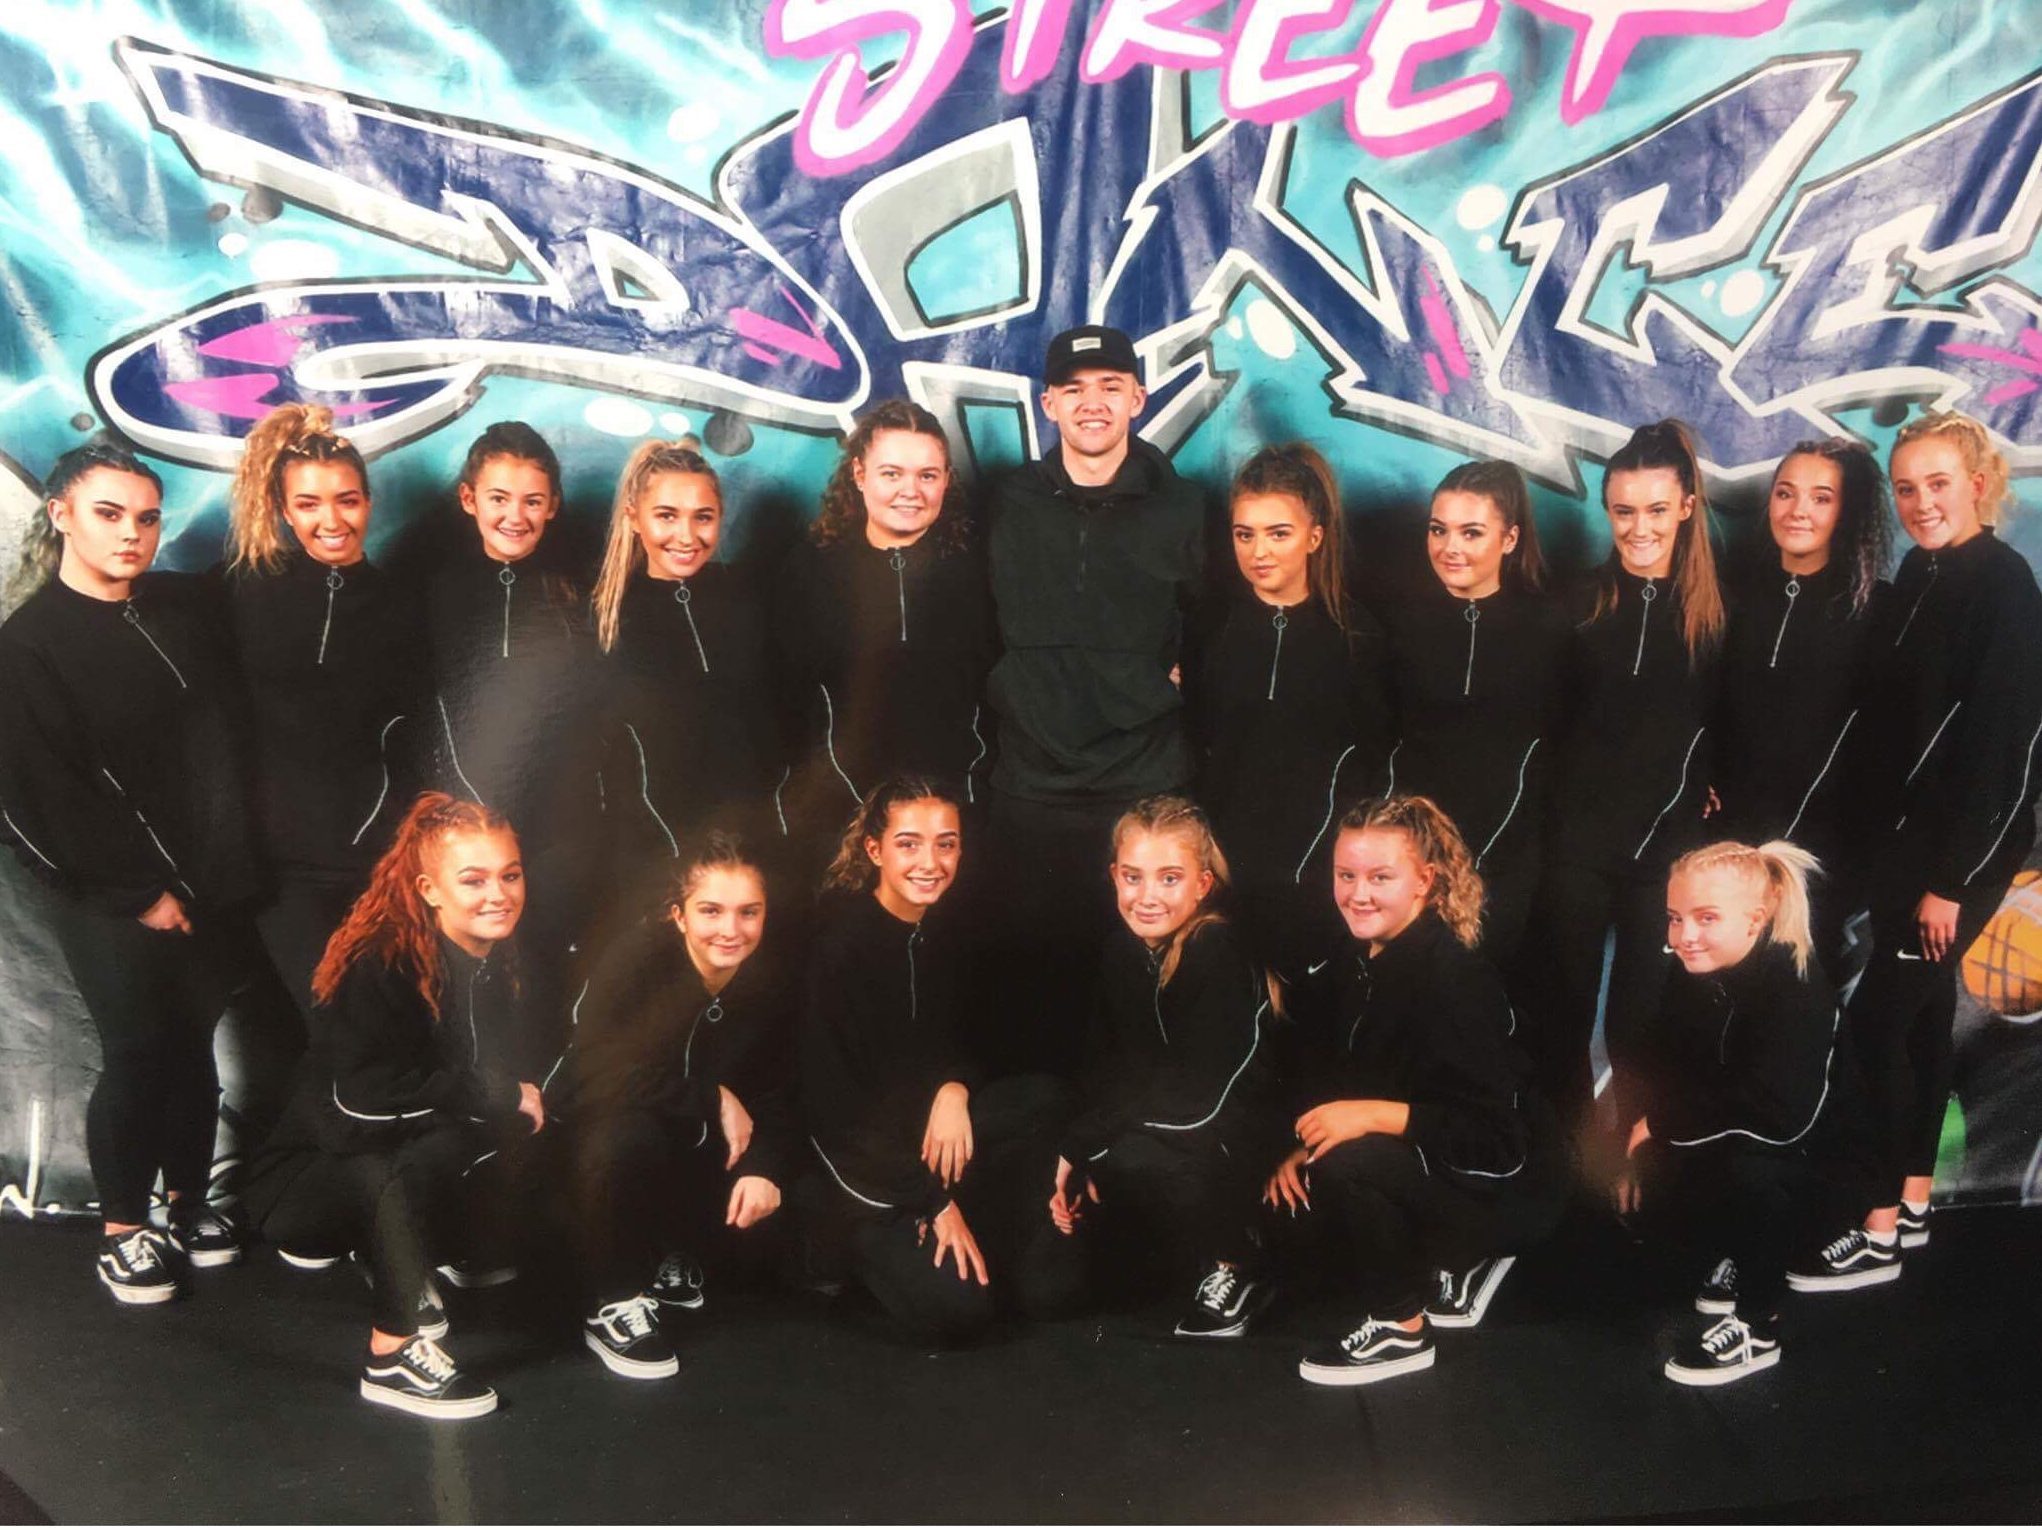 The Addicted 2 Dance competitors.